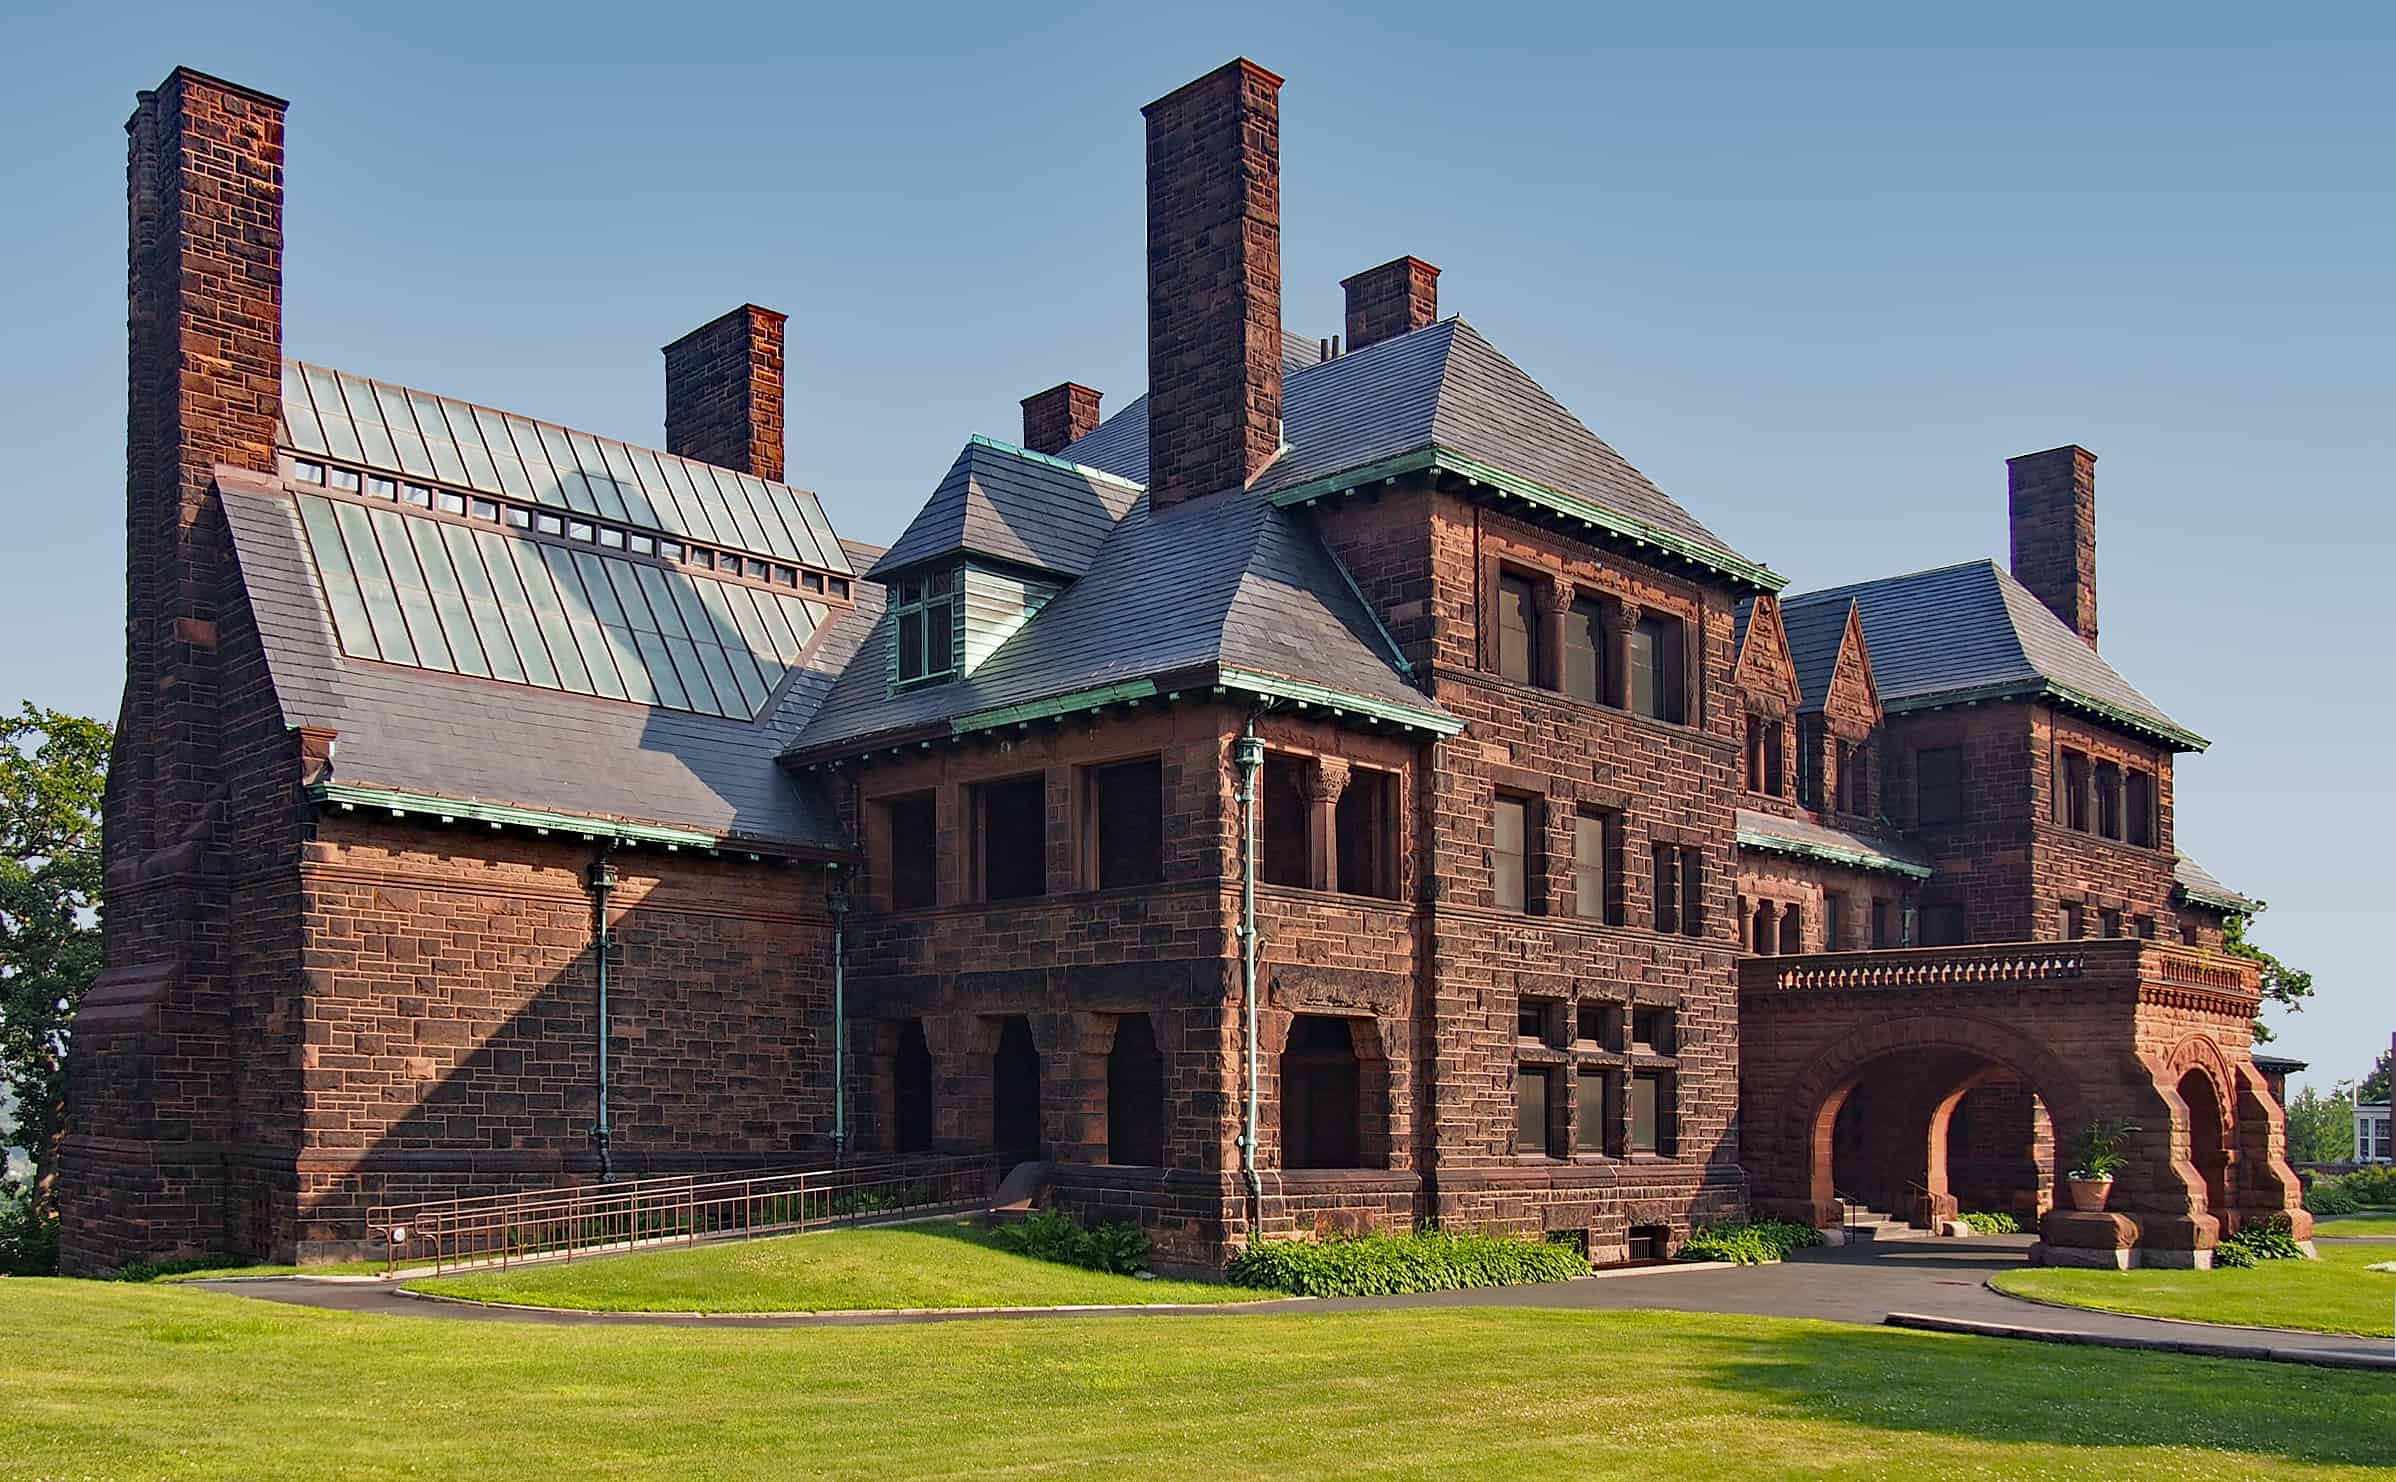 The James J. Hill House is the largest house in Minnesota.